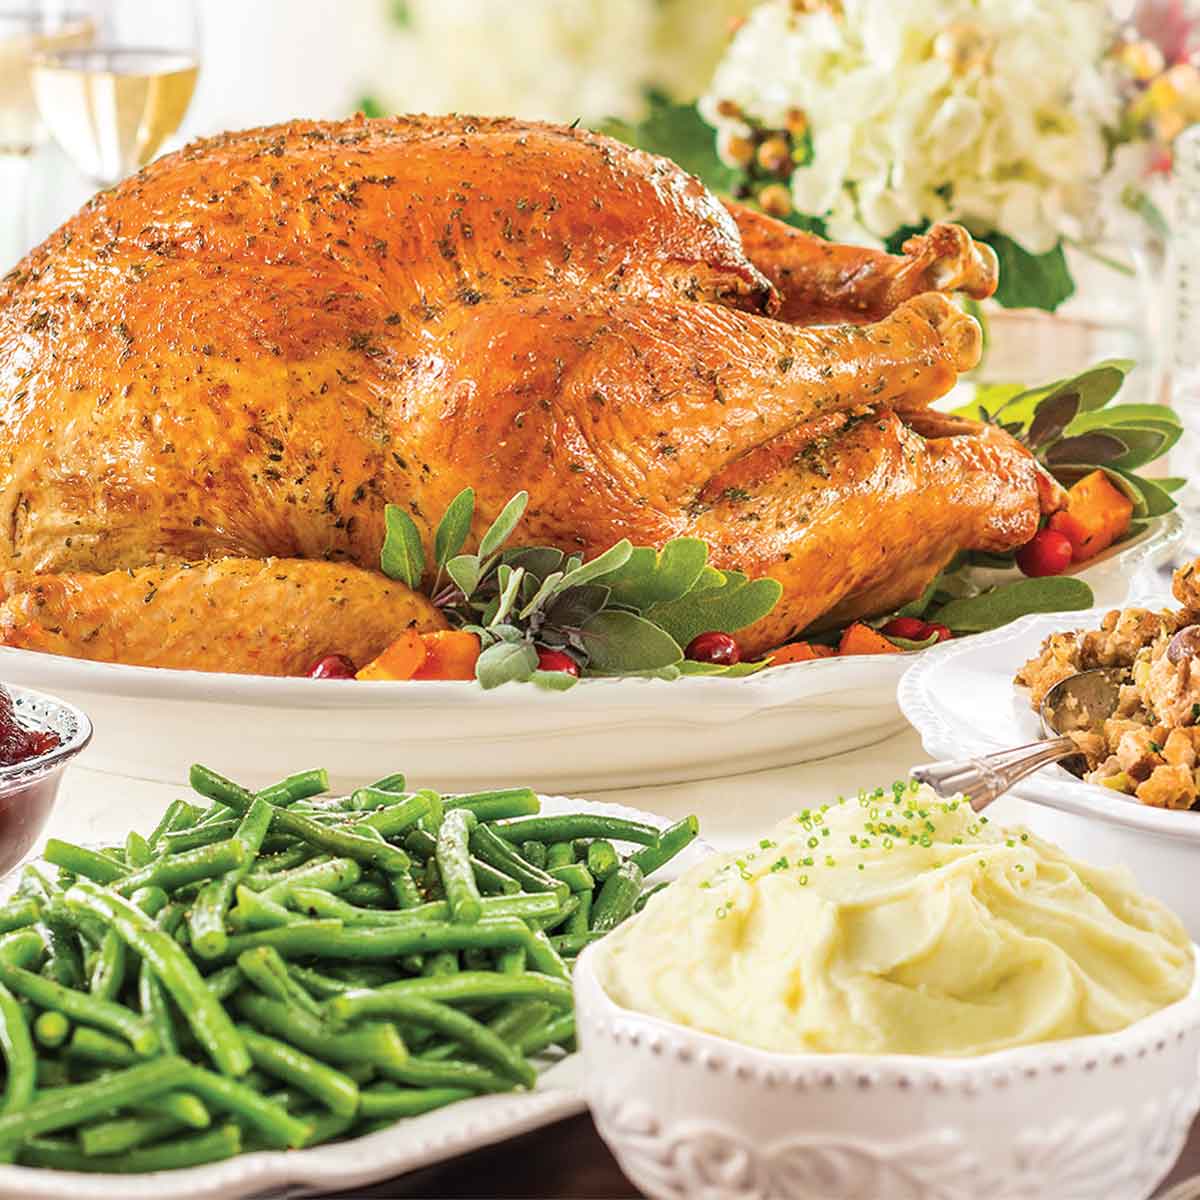 Wegmans Christmas Dinner Catering Here's our festive dining guide to